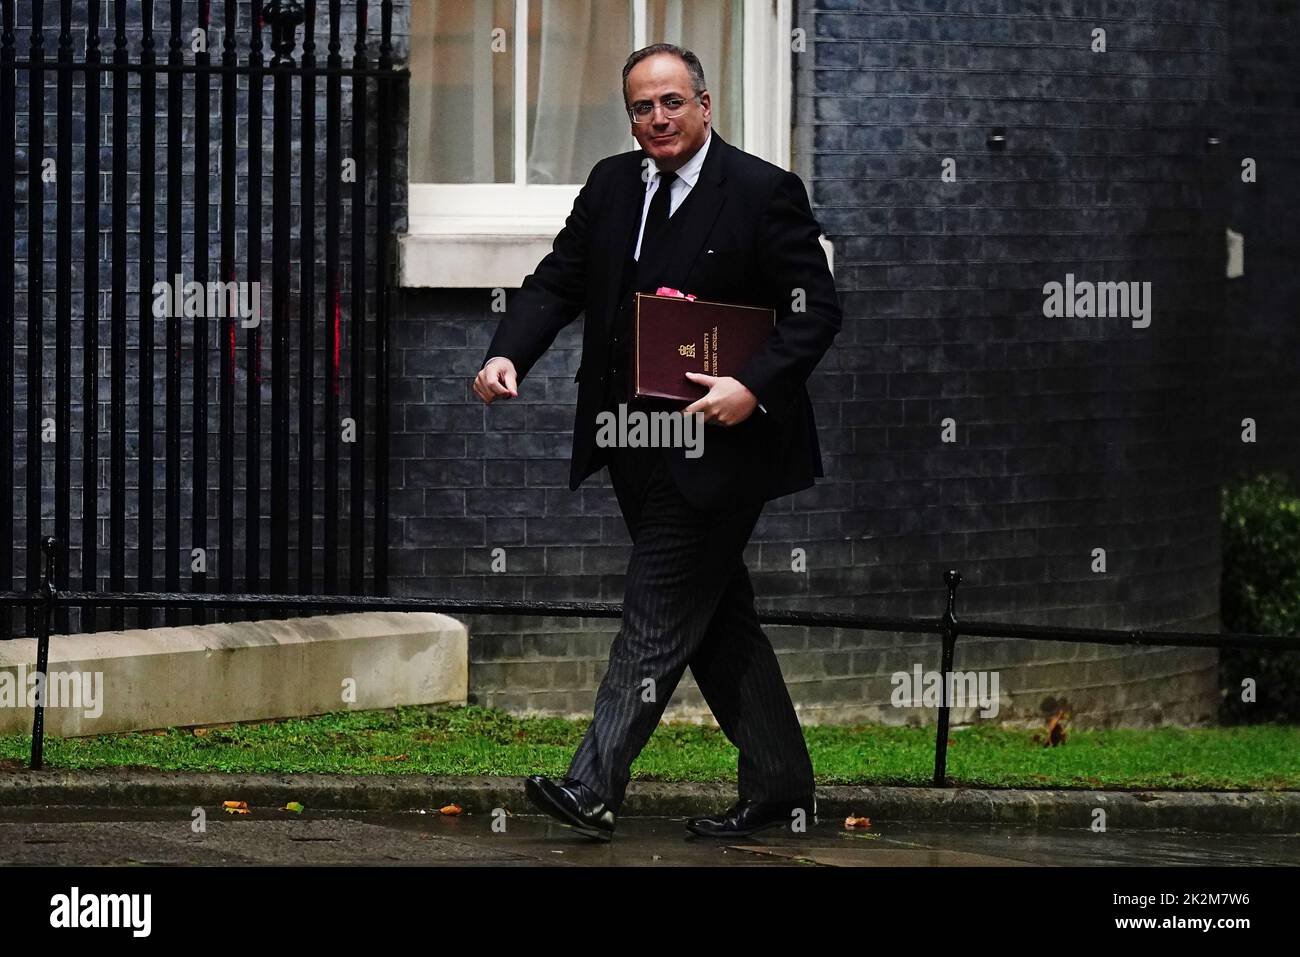 Attorney General Michael Ellis arrives for a cabinet meeting at 10 Downing Street, London, ahead of a mini-budget announcement by Chancellor of the Exchequer Kwasi Kwarteng. Picture date: Friday September 23, 2022. Stock Photo